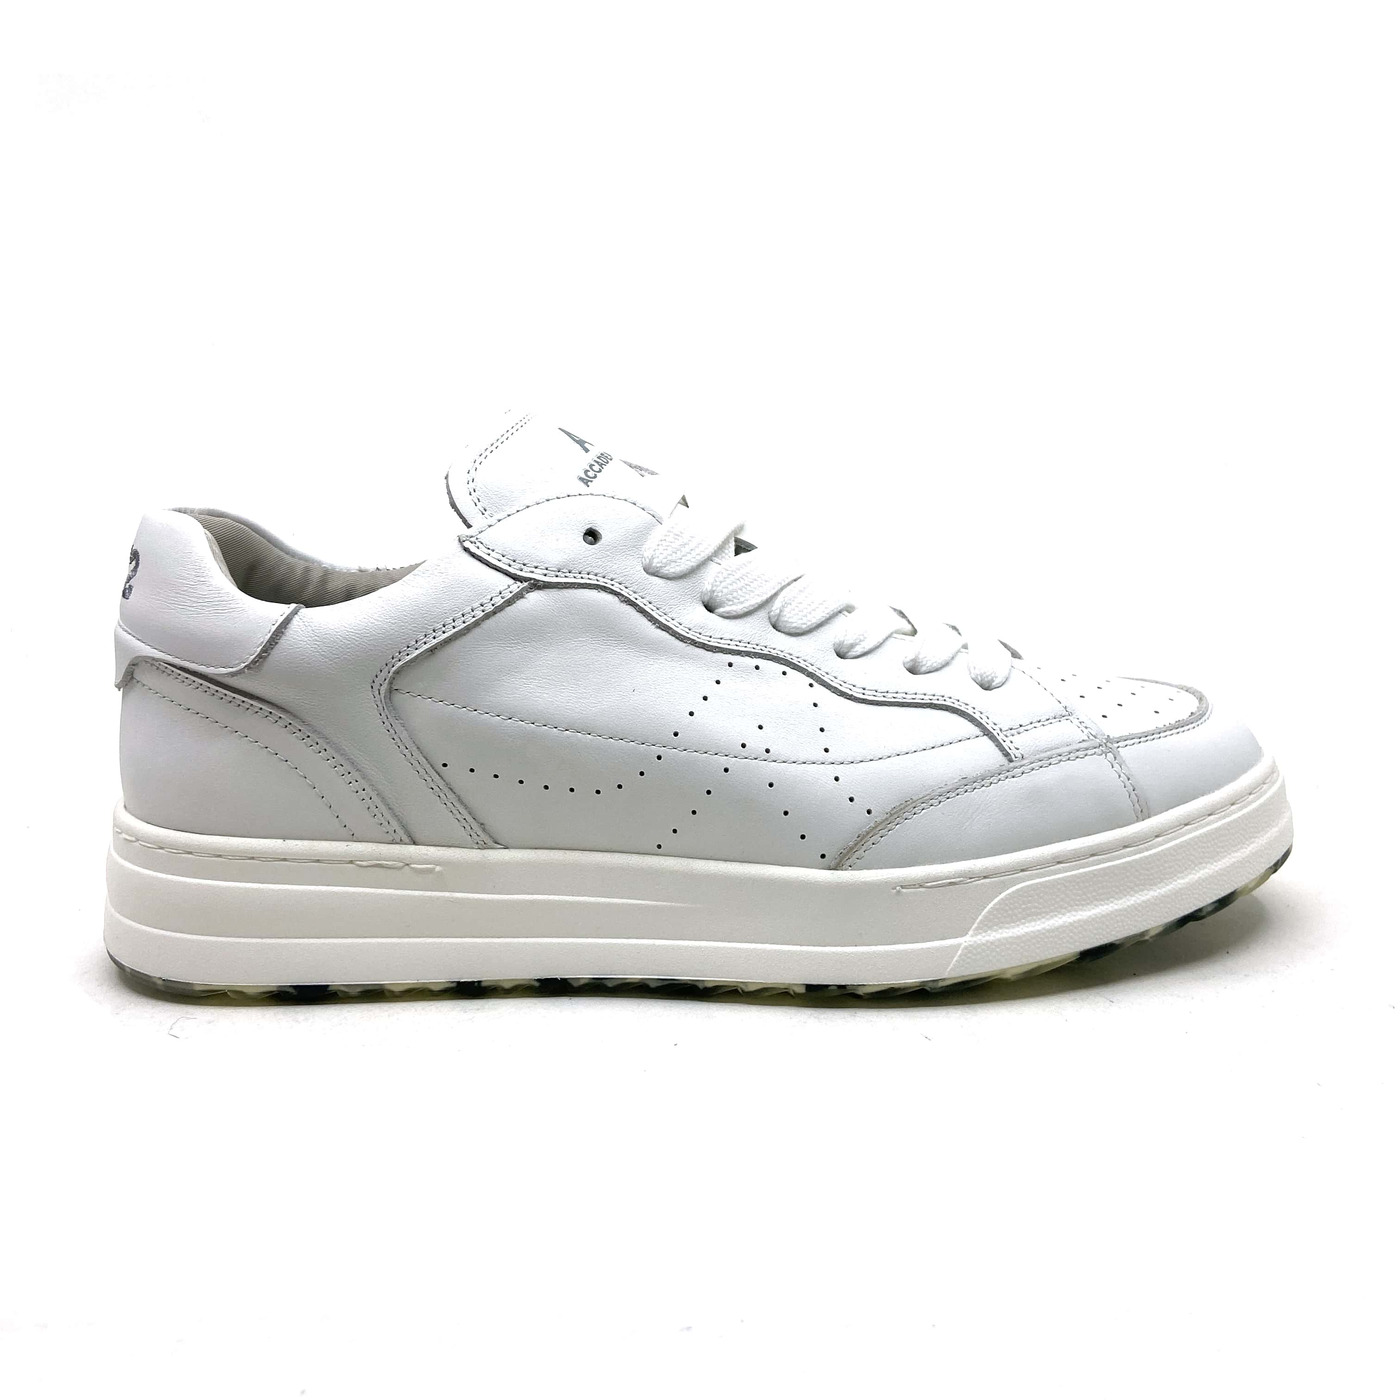 Accademia 72 sneaker wit